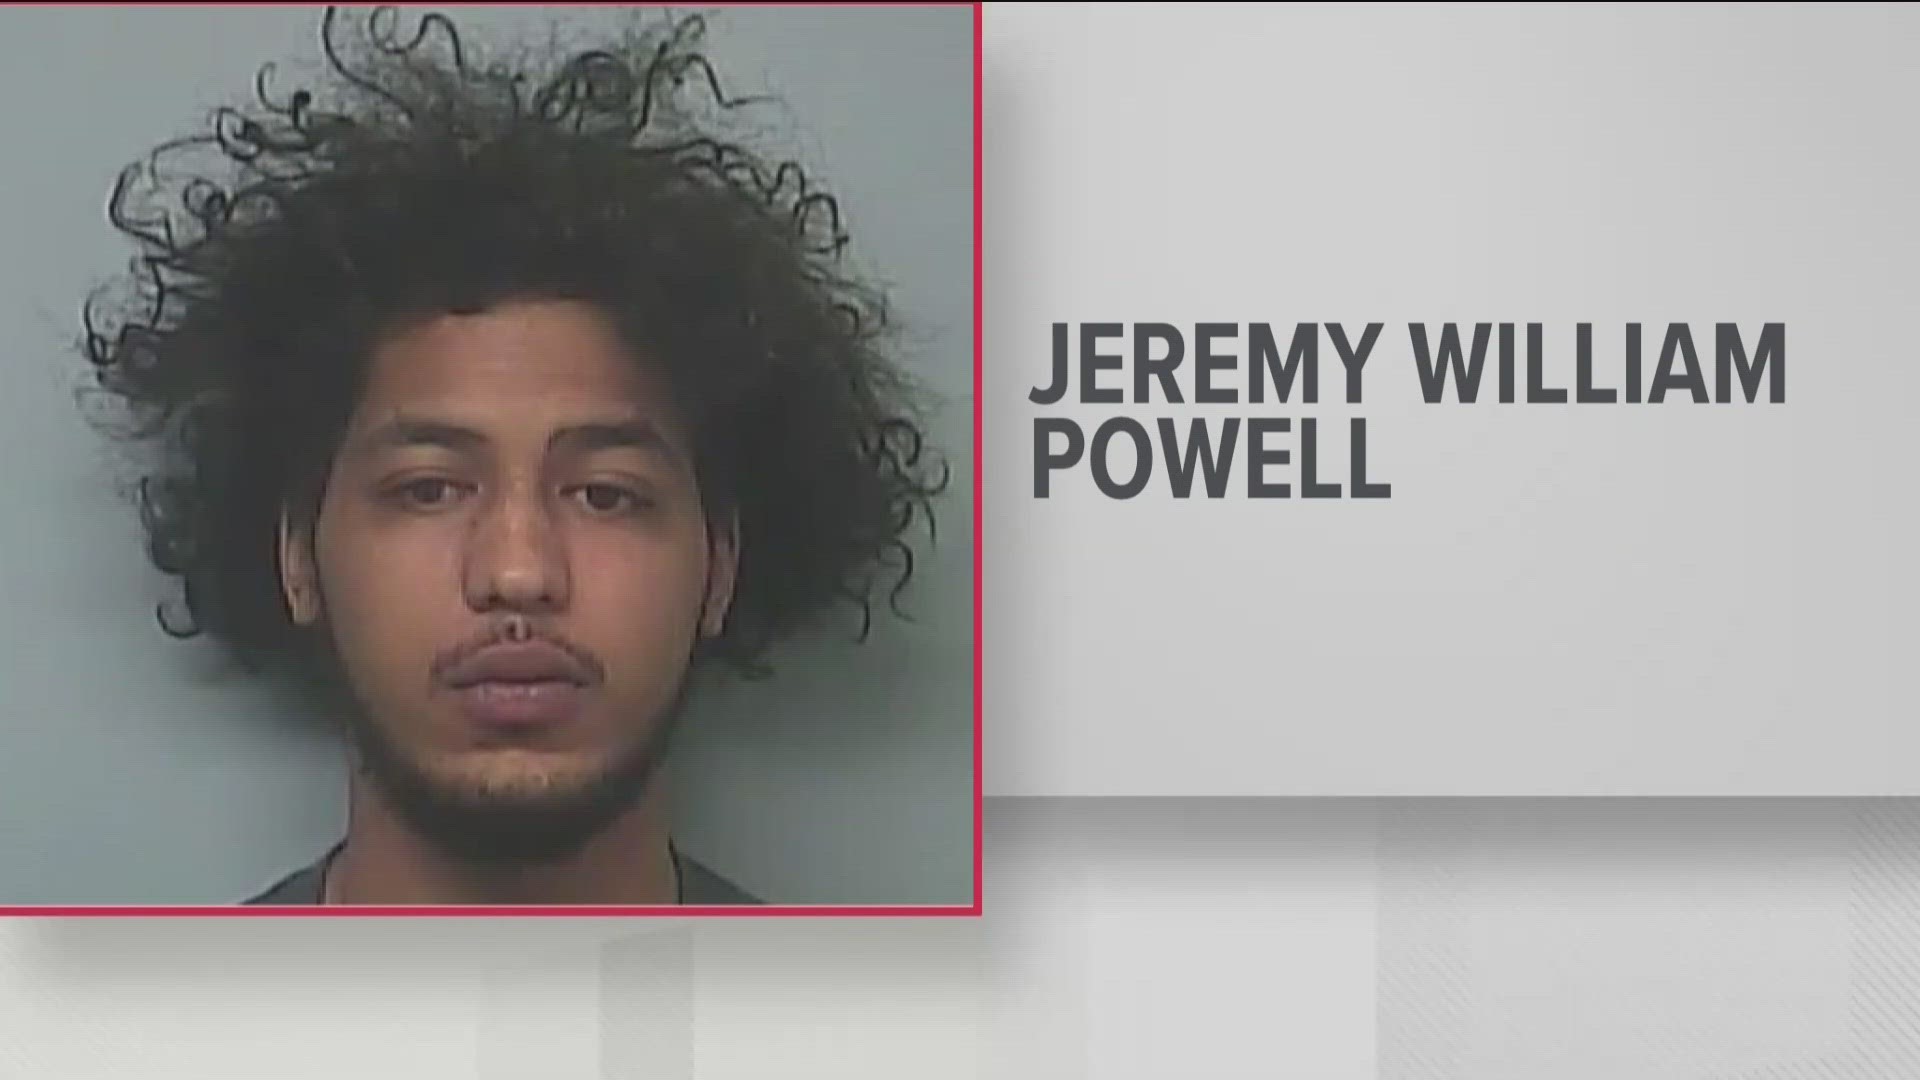 Police are asking the public for help finding Jeremy Powell.